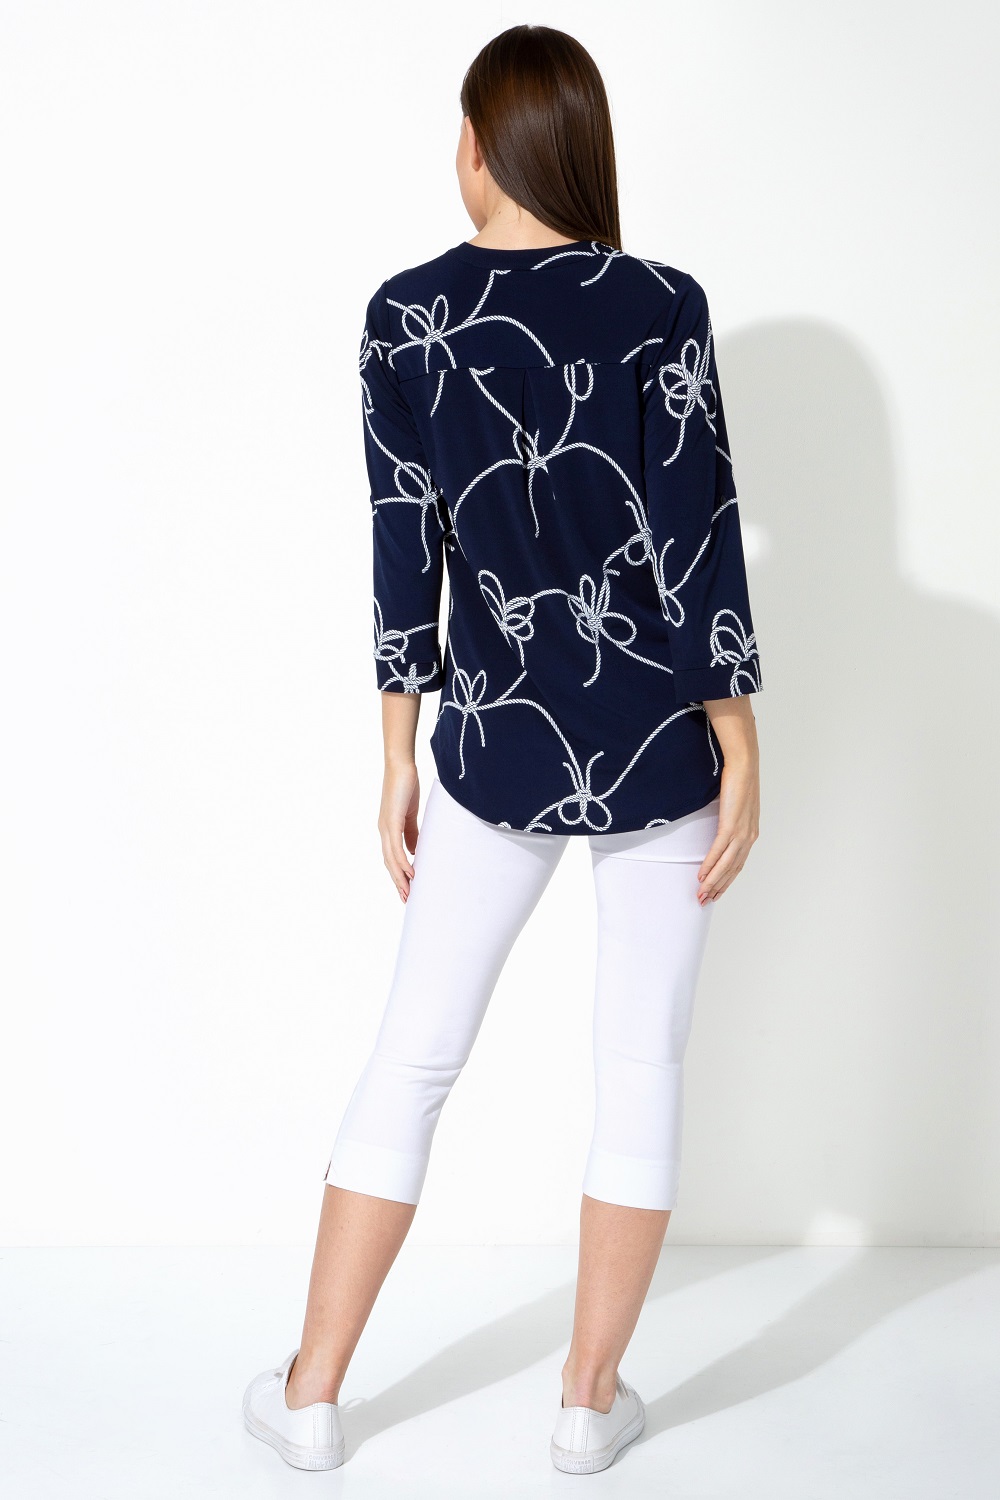 Navy/White Rope Print Button Detail Top, Image 3 of 4